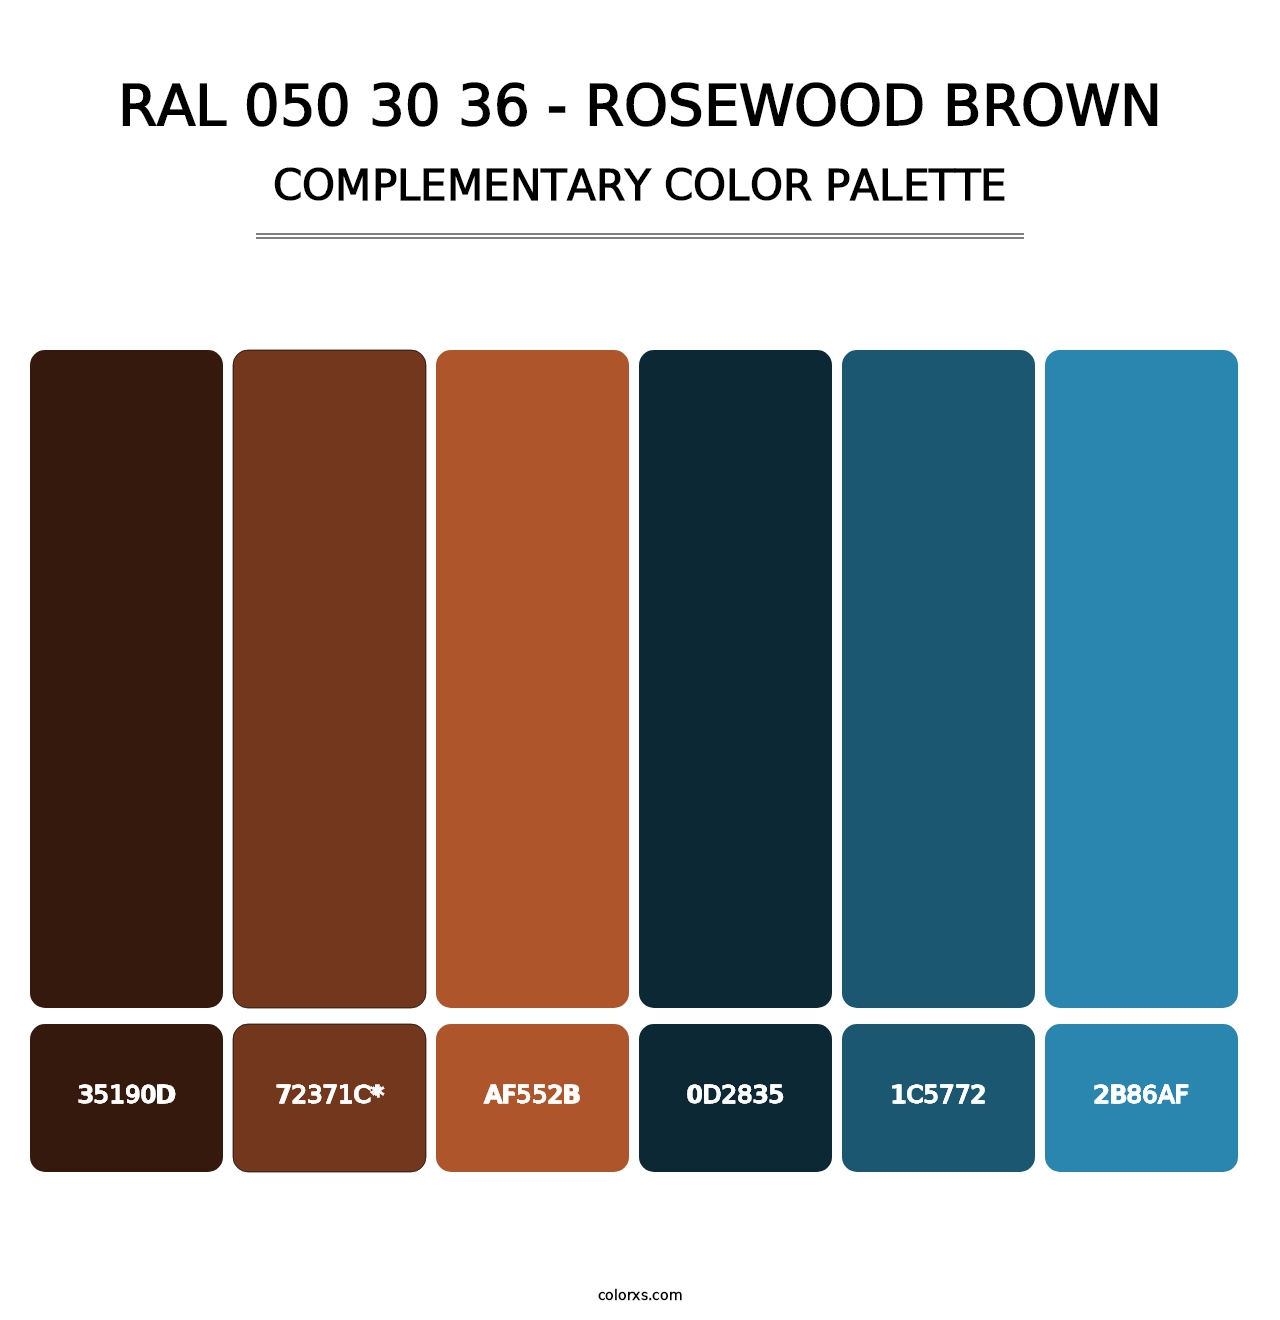 RAL 050 30 36 - Rosewood Brown - Complementary Color Palette